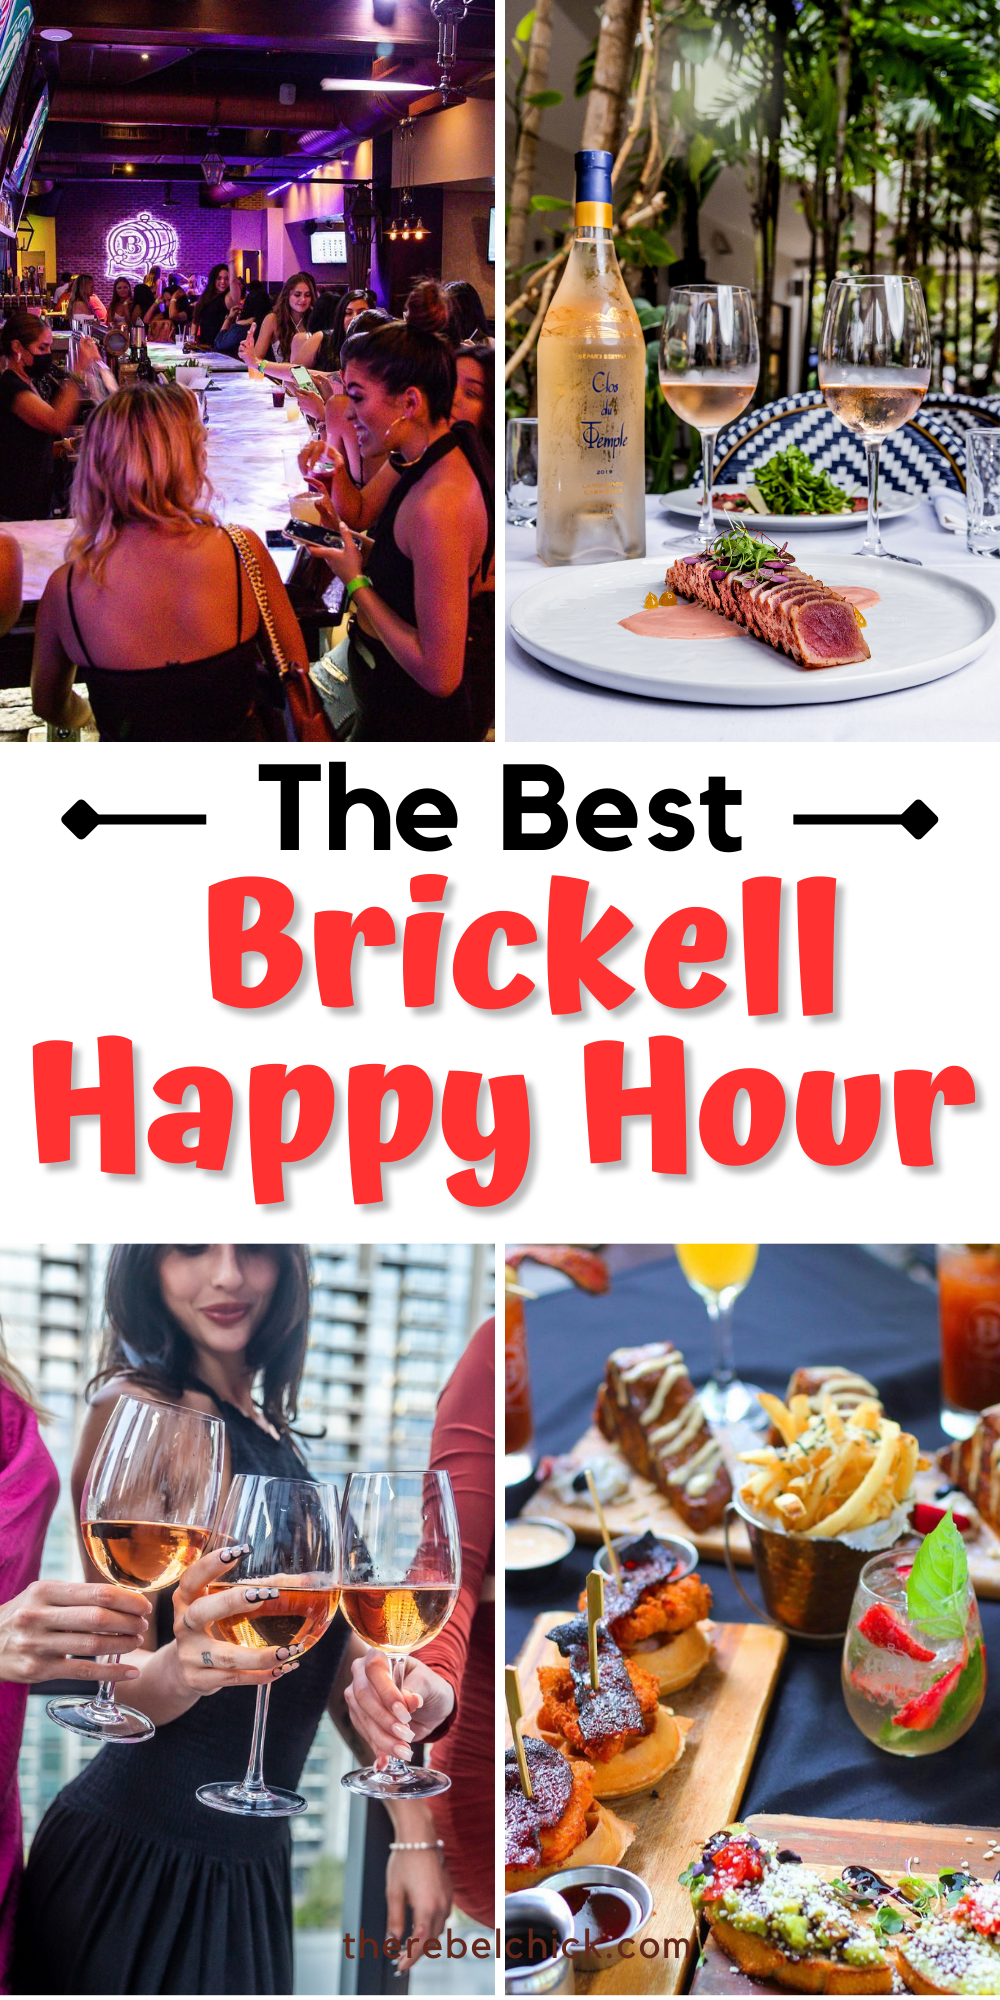 Check out some of The Best Brickell Happy Hour Spots for your next happy hour hang out, because nobody does Happy Hour quite like Brickell!